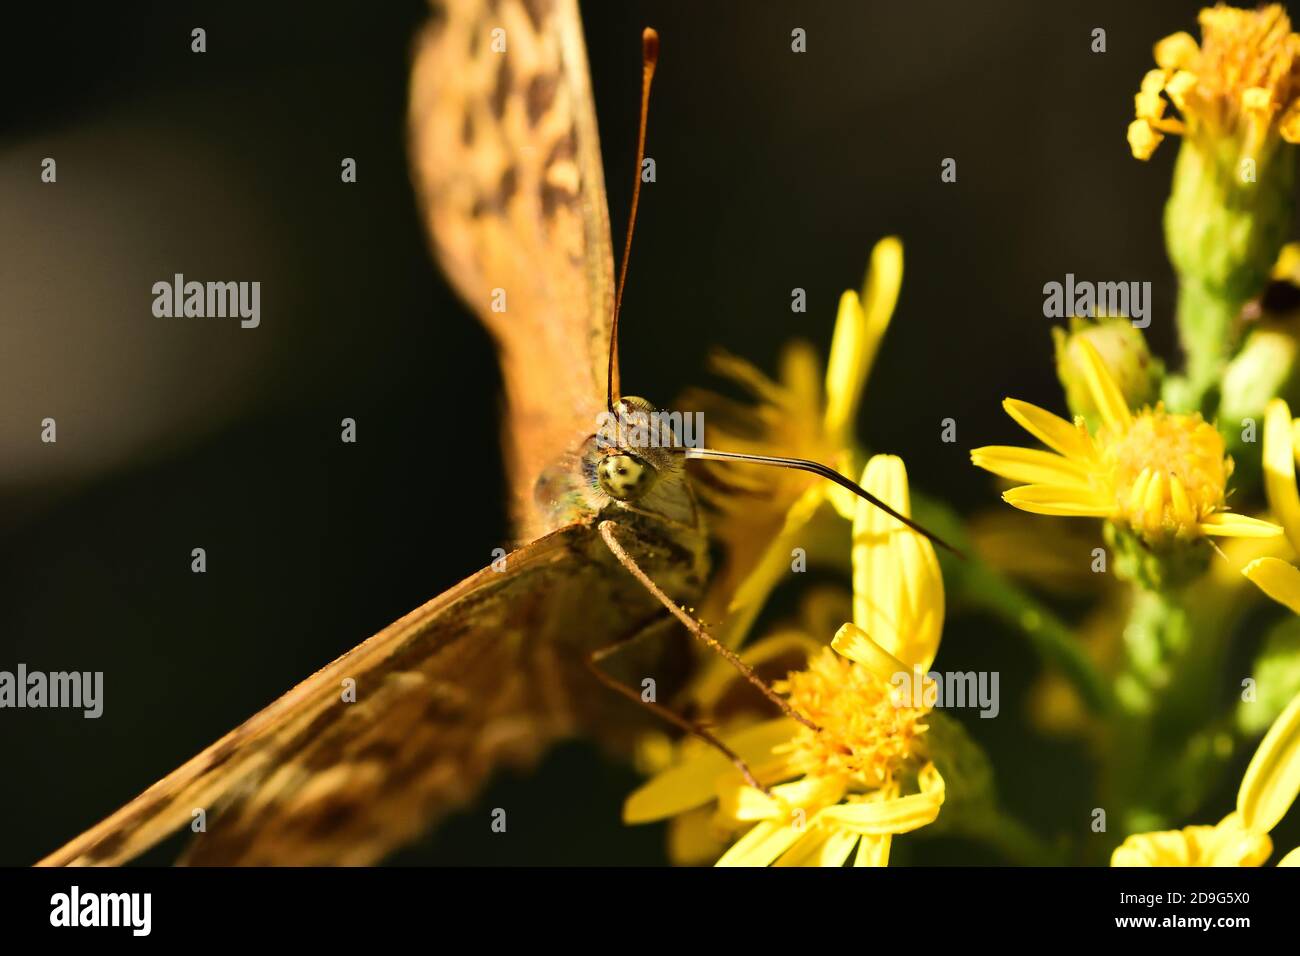 Close-up photo of Isolated butterfly specimen Queen of Spain fritillary, laid on wild flowers. Stock Photo